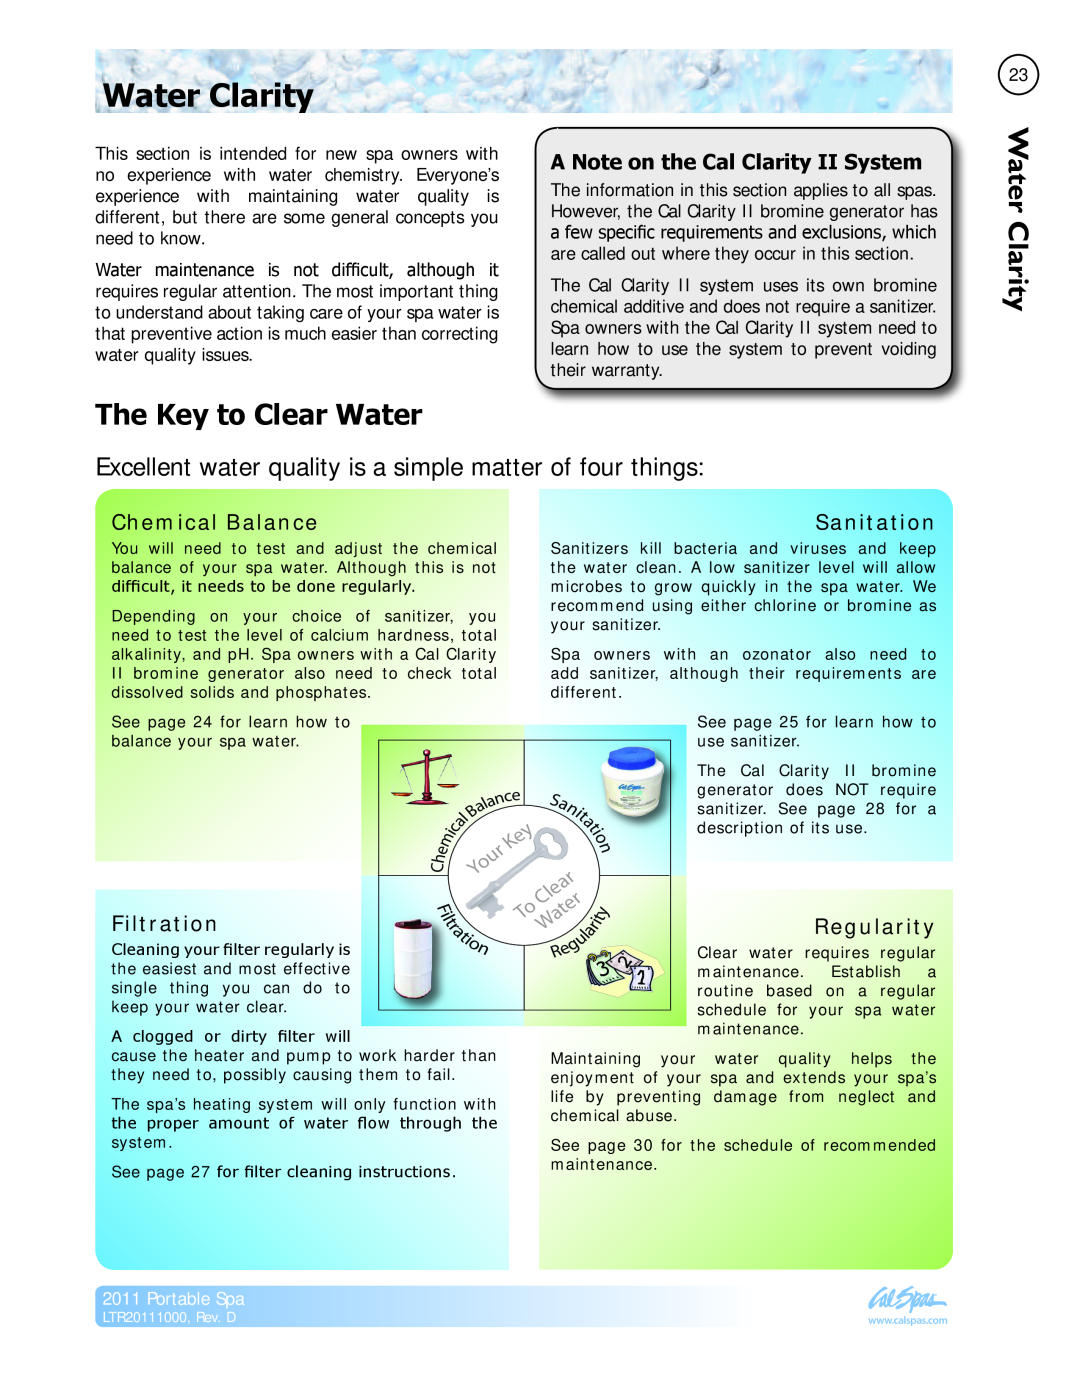 Cal Spas LTR20111000 Water Clarity, The Key to Clear Water, A Note on the Cal Clarity II System, Chemical Balance, Sanit 